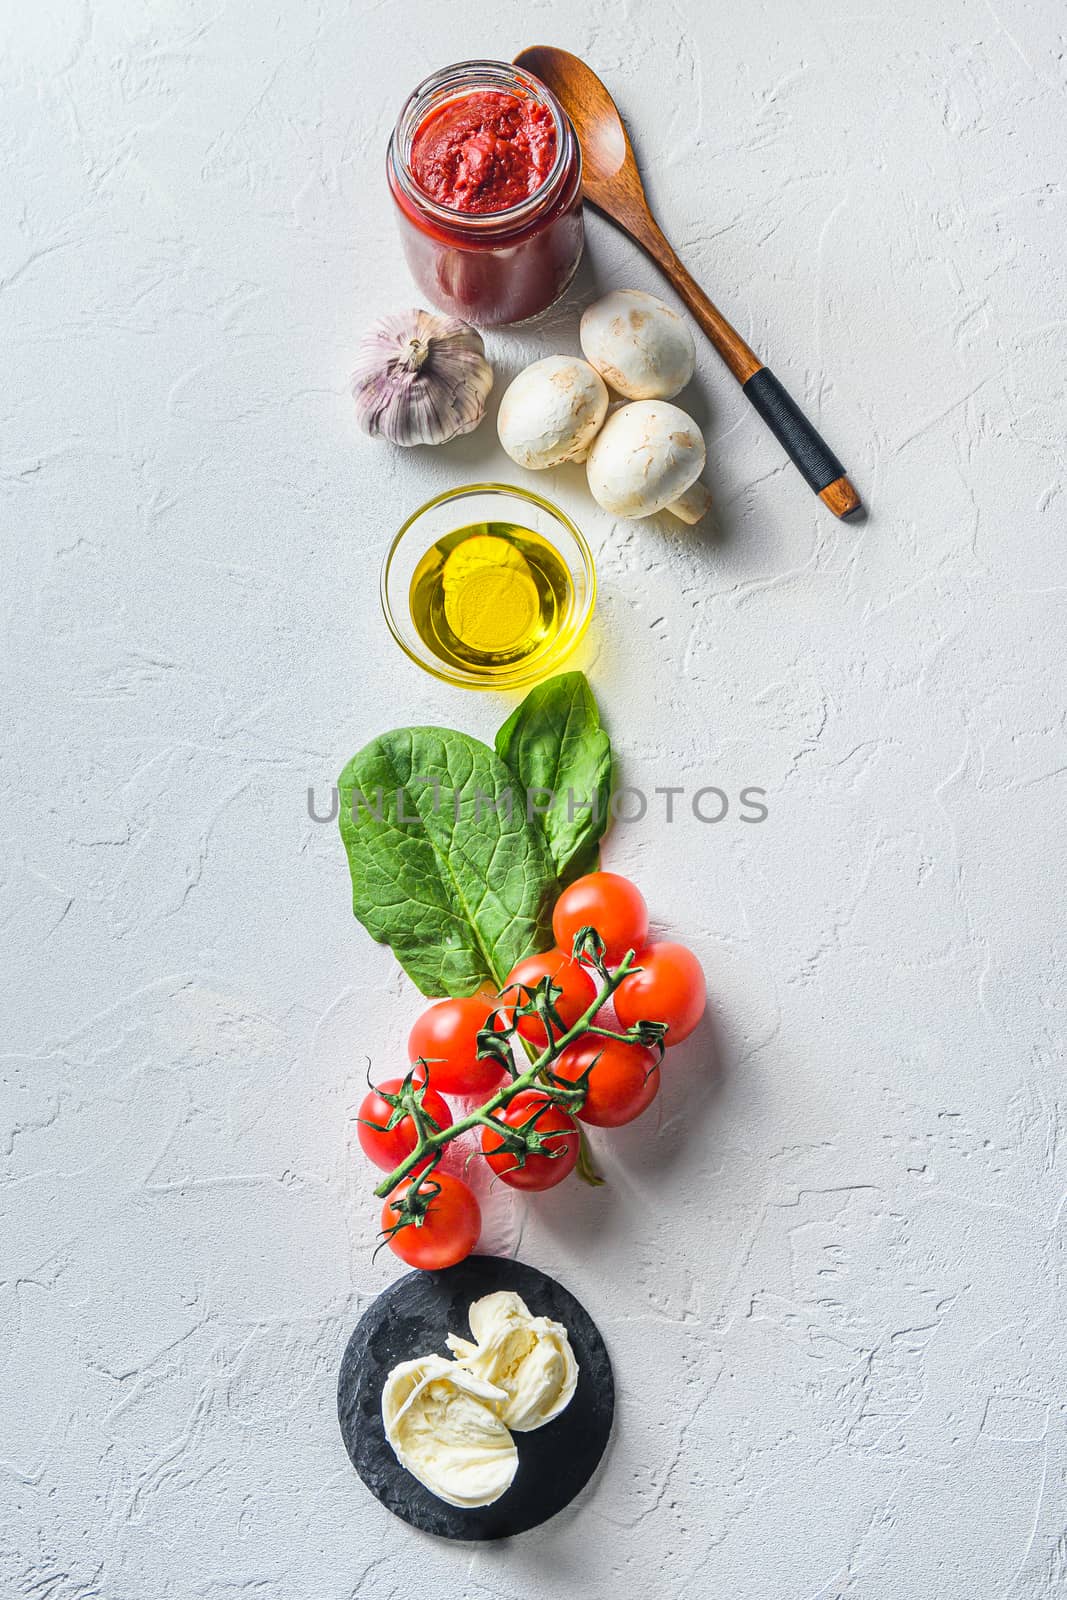 Pizza ingredients for cooking, tomatoes, oil, garlic, basil, sauce, mushroom on white background by Ilianesolenyi